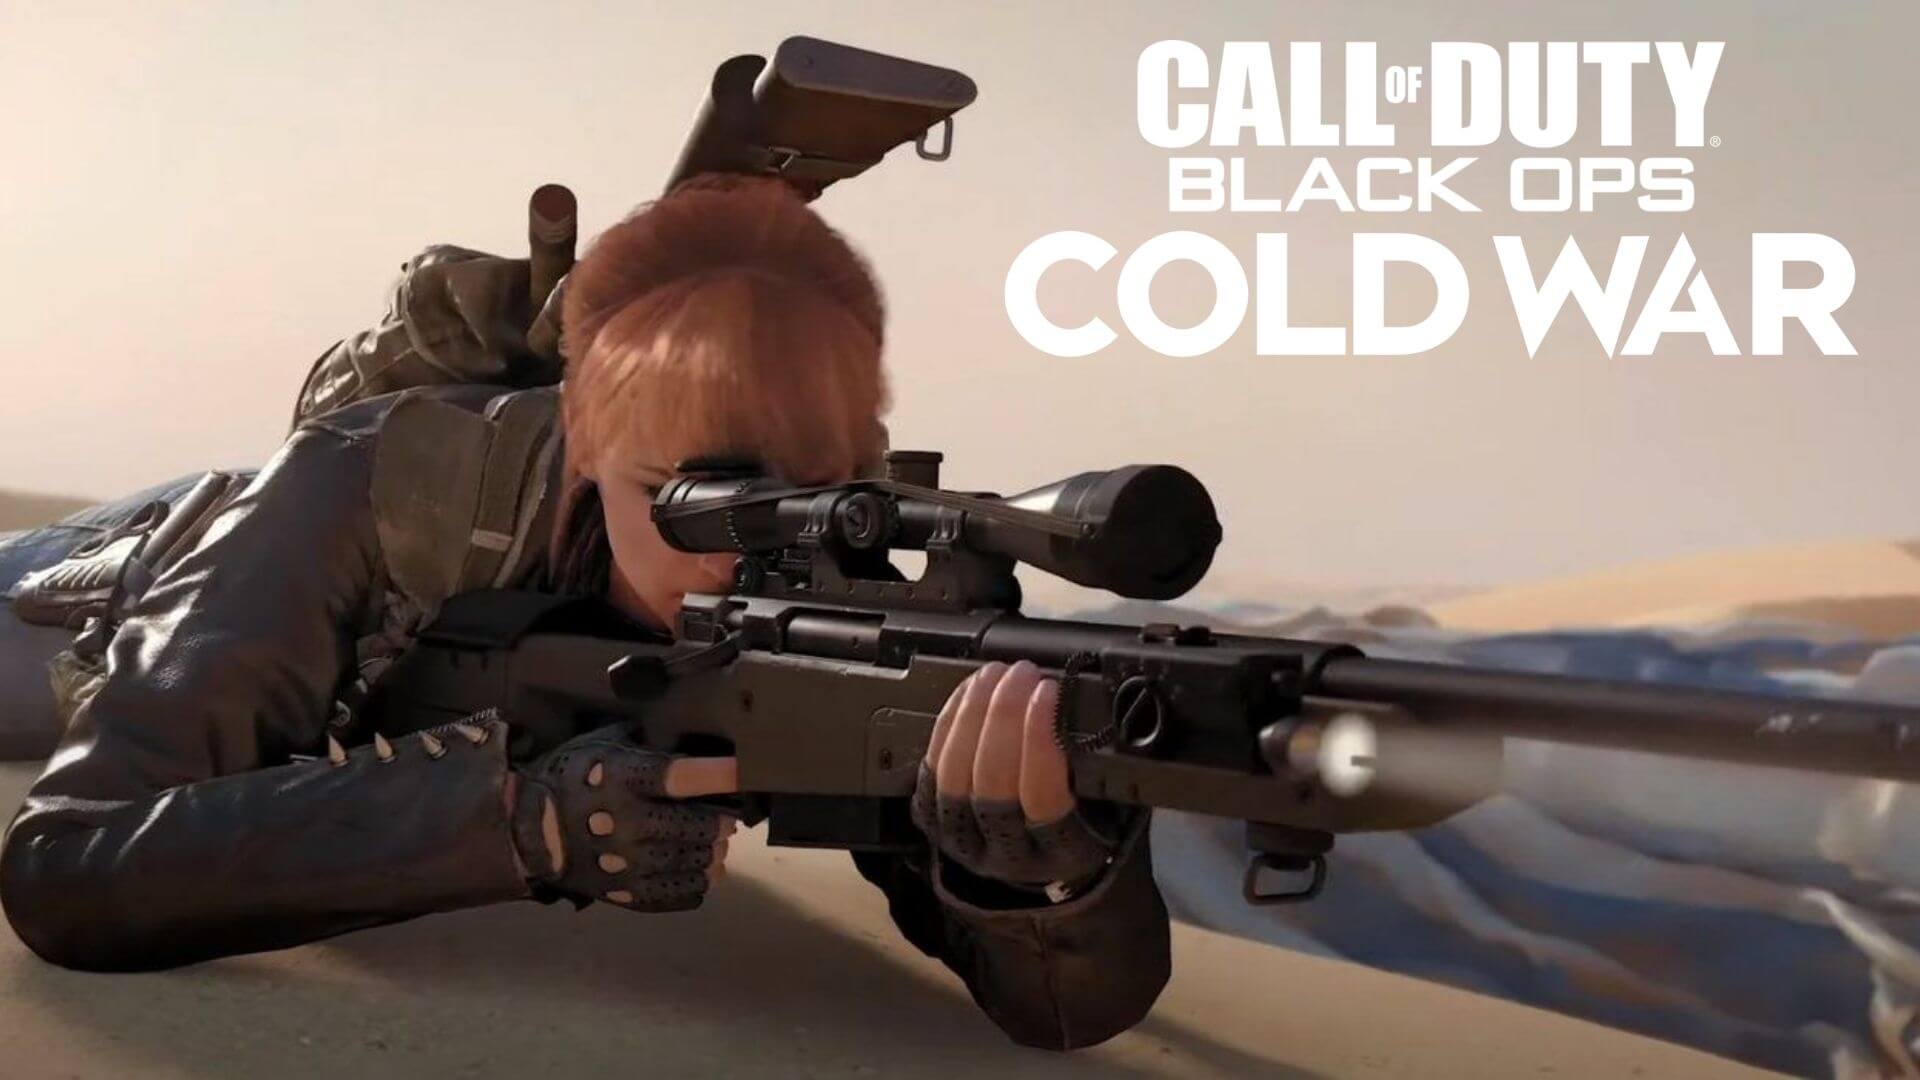 portnova aiming with sniper rifle in black ops cold war